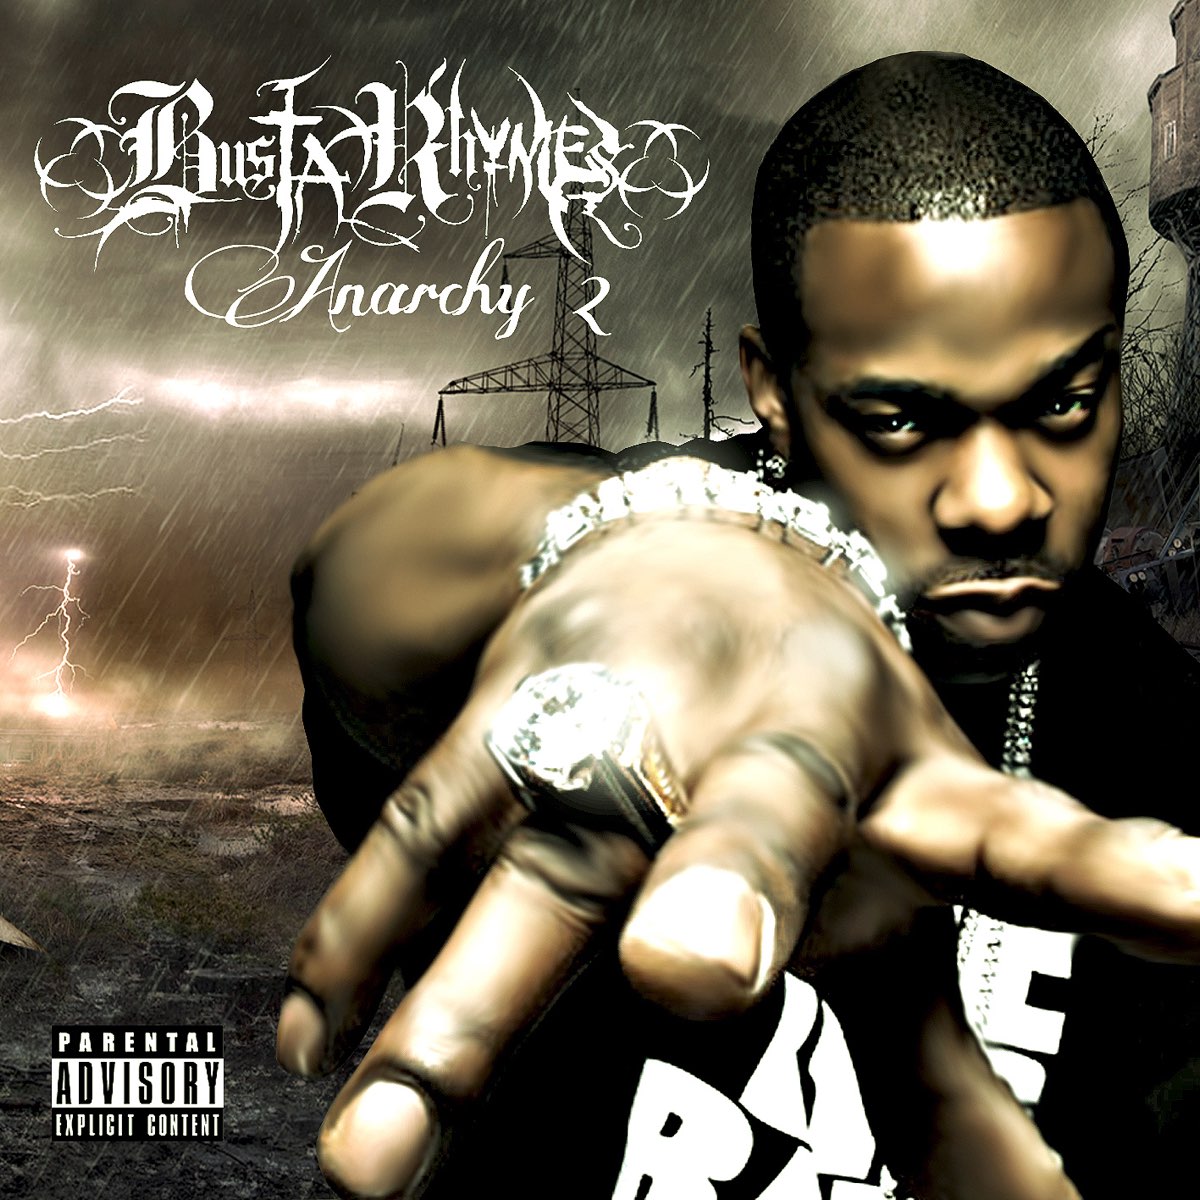 Anarchy 2 by Busta Rhymes on Apple Music